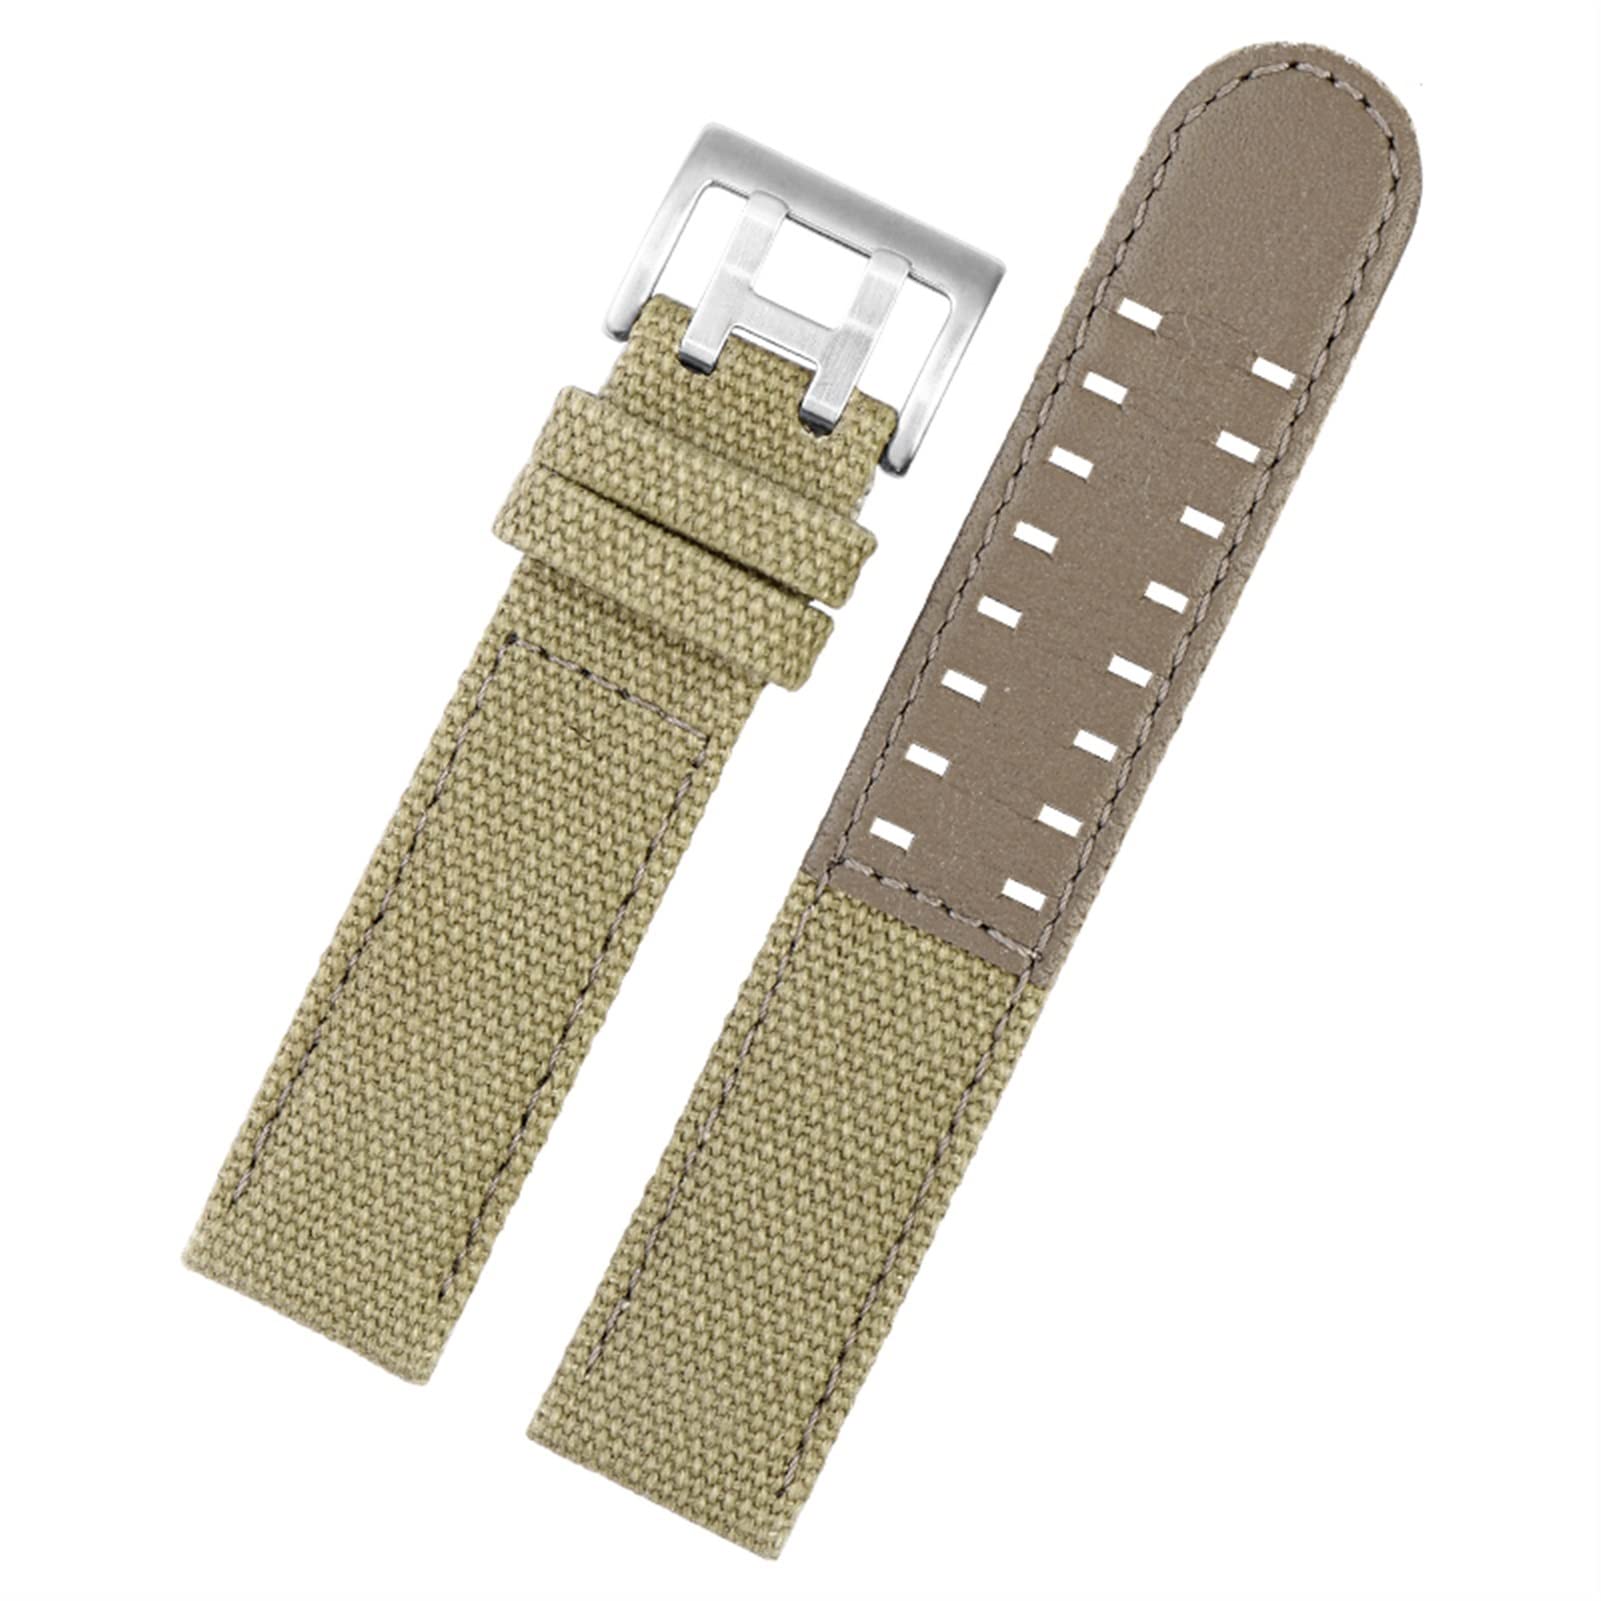 HAODEE for Hamilton Khaki Field Watch h760250/h77616533/h70605963 H68201993 Watch Strap Genuine Leather Nylon Men Watch Band 20mm 22mm (Color : Khaki Black Clasp, Size : 20mm)